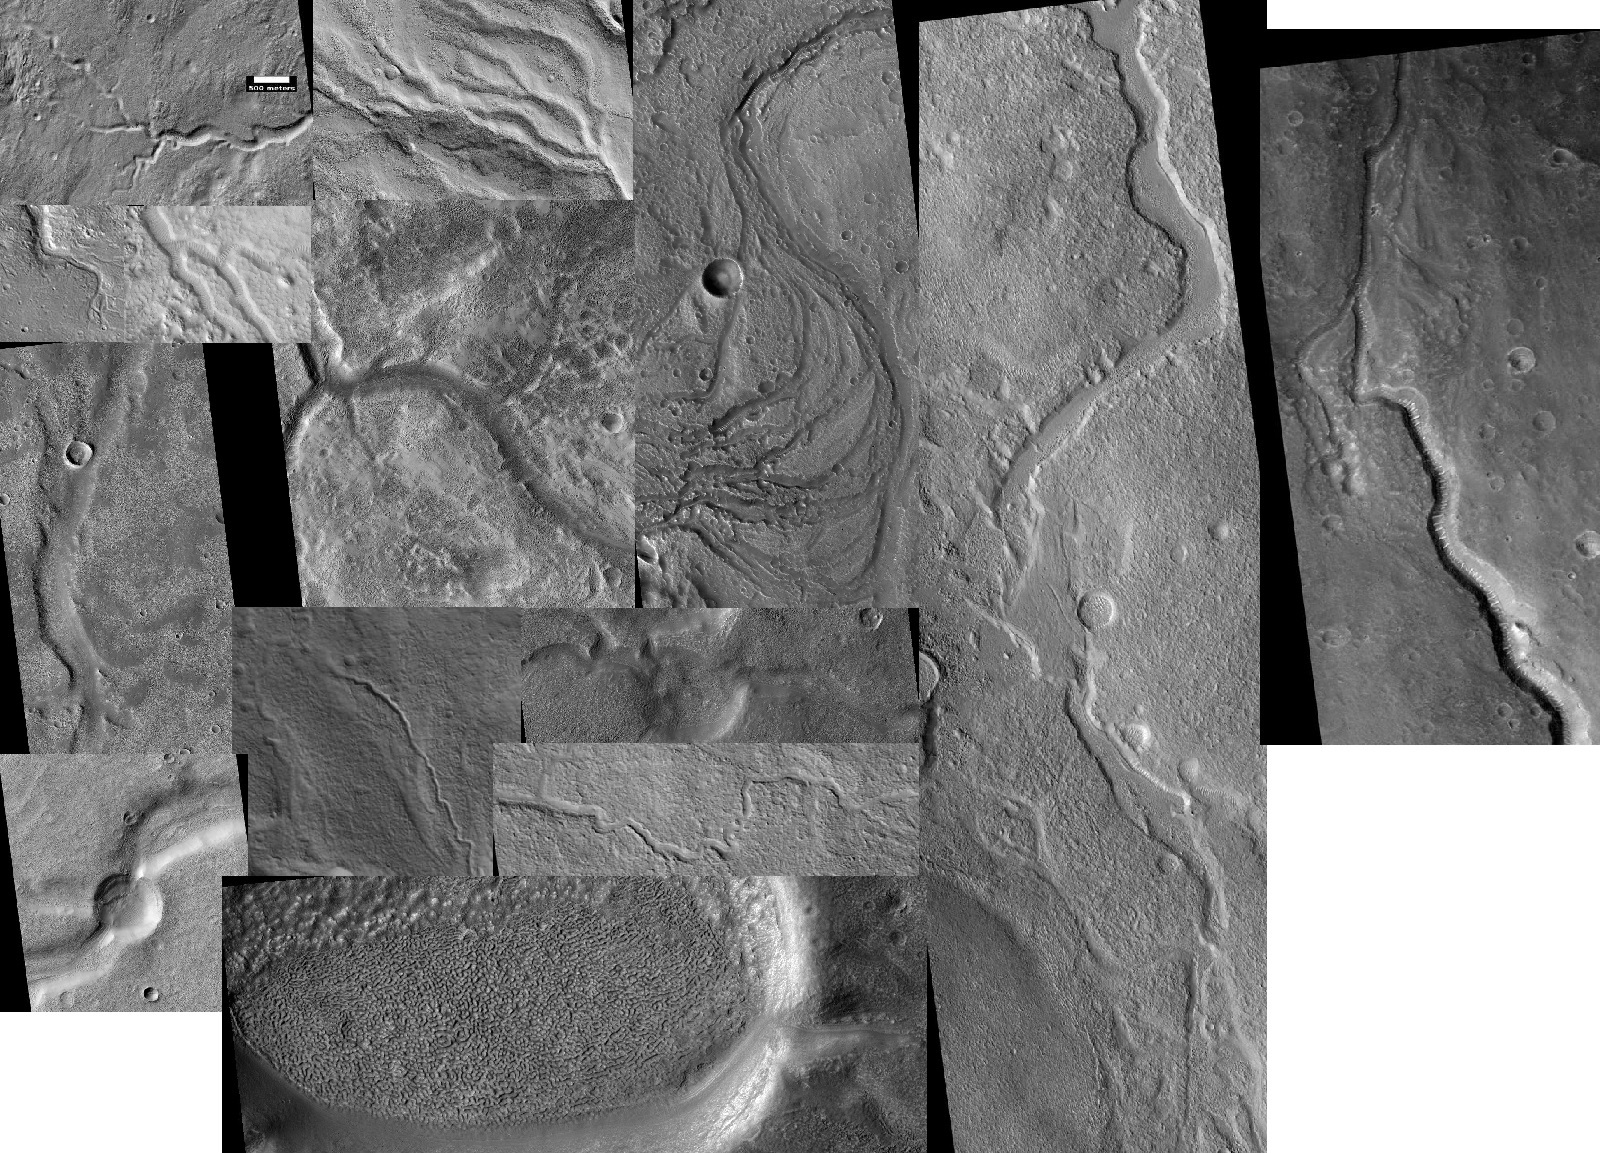 Image shows the variety of channels on Mars. In the past Mars once had many streams and rivers.